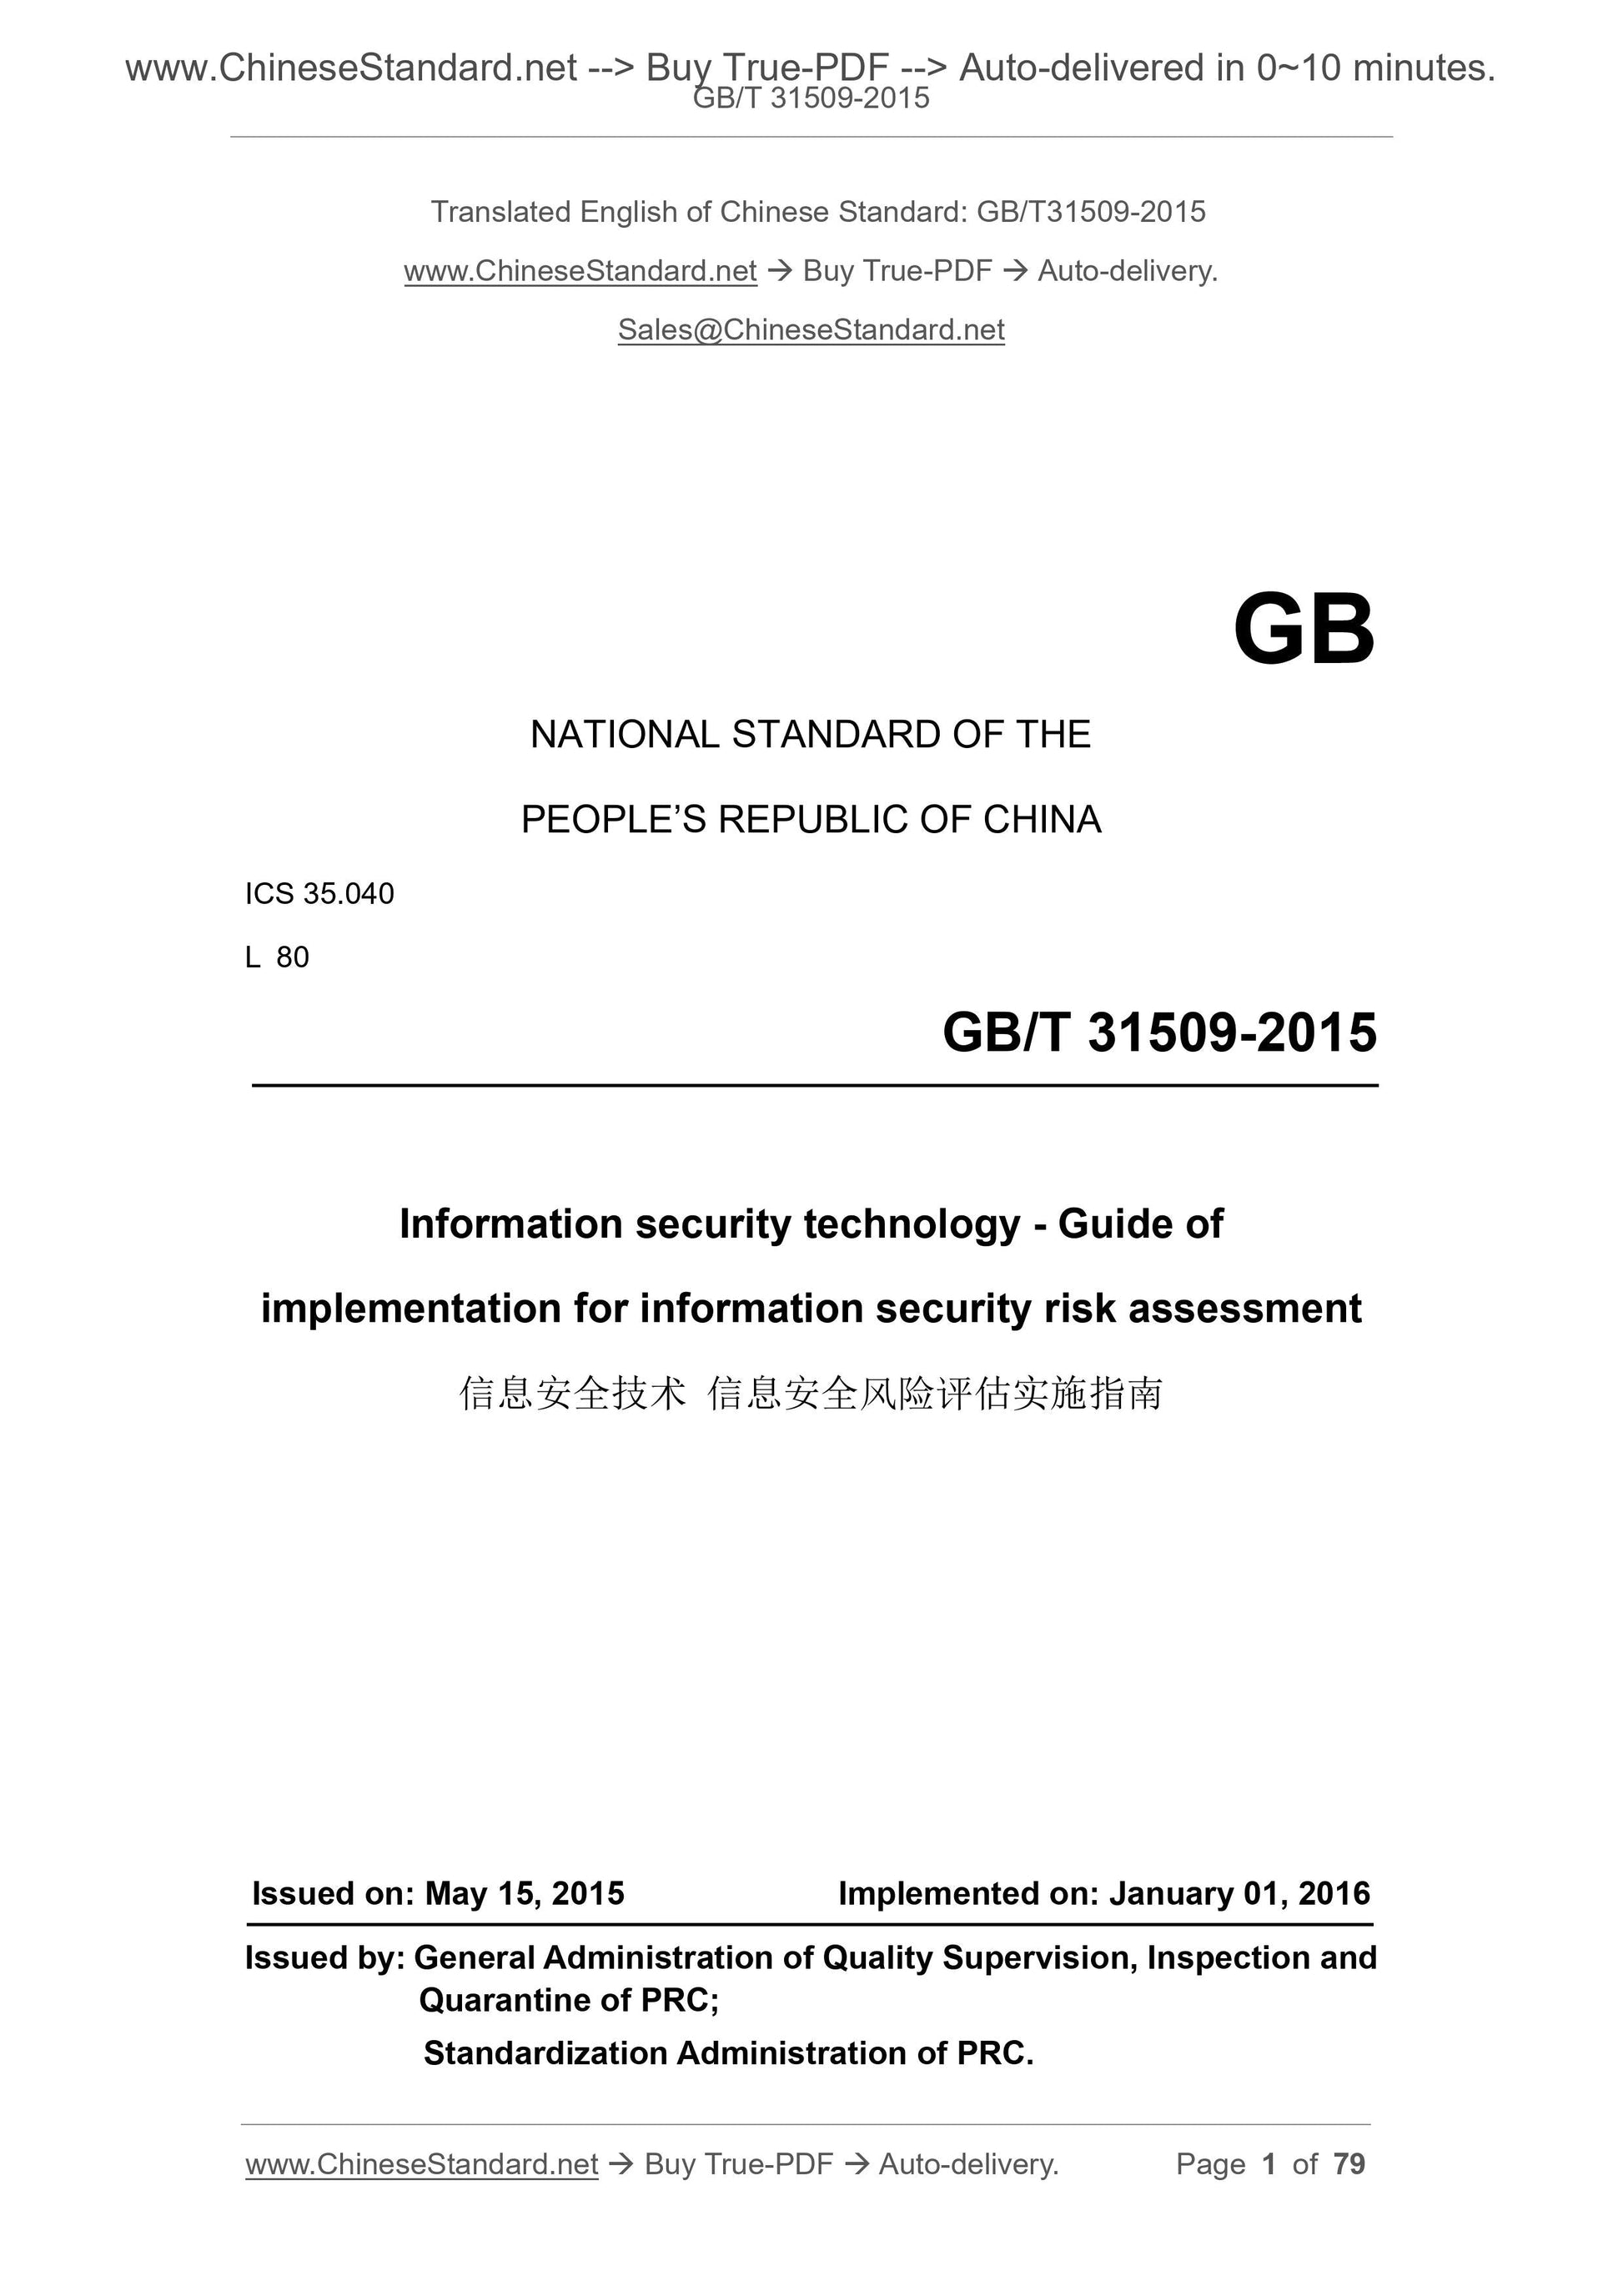 GB/T 31509-2015 Page 1